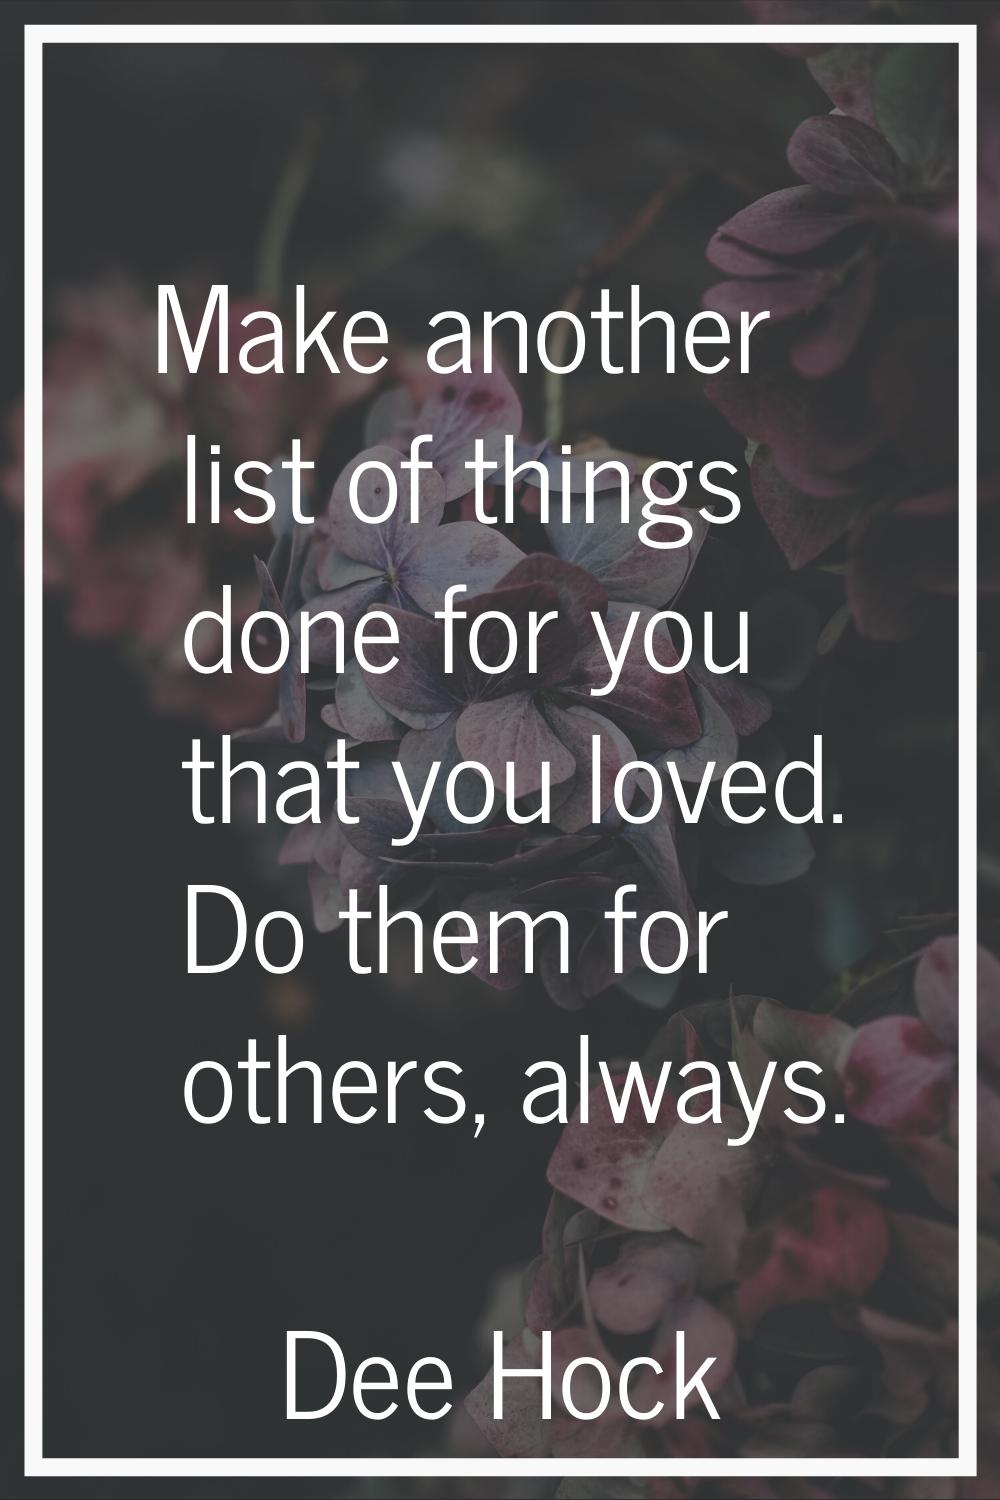 Make another list of things done for you that you loved. Do them for others, always.